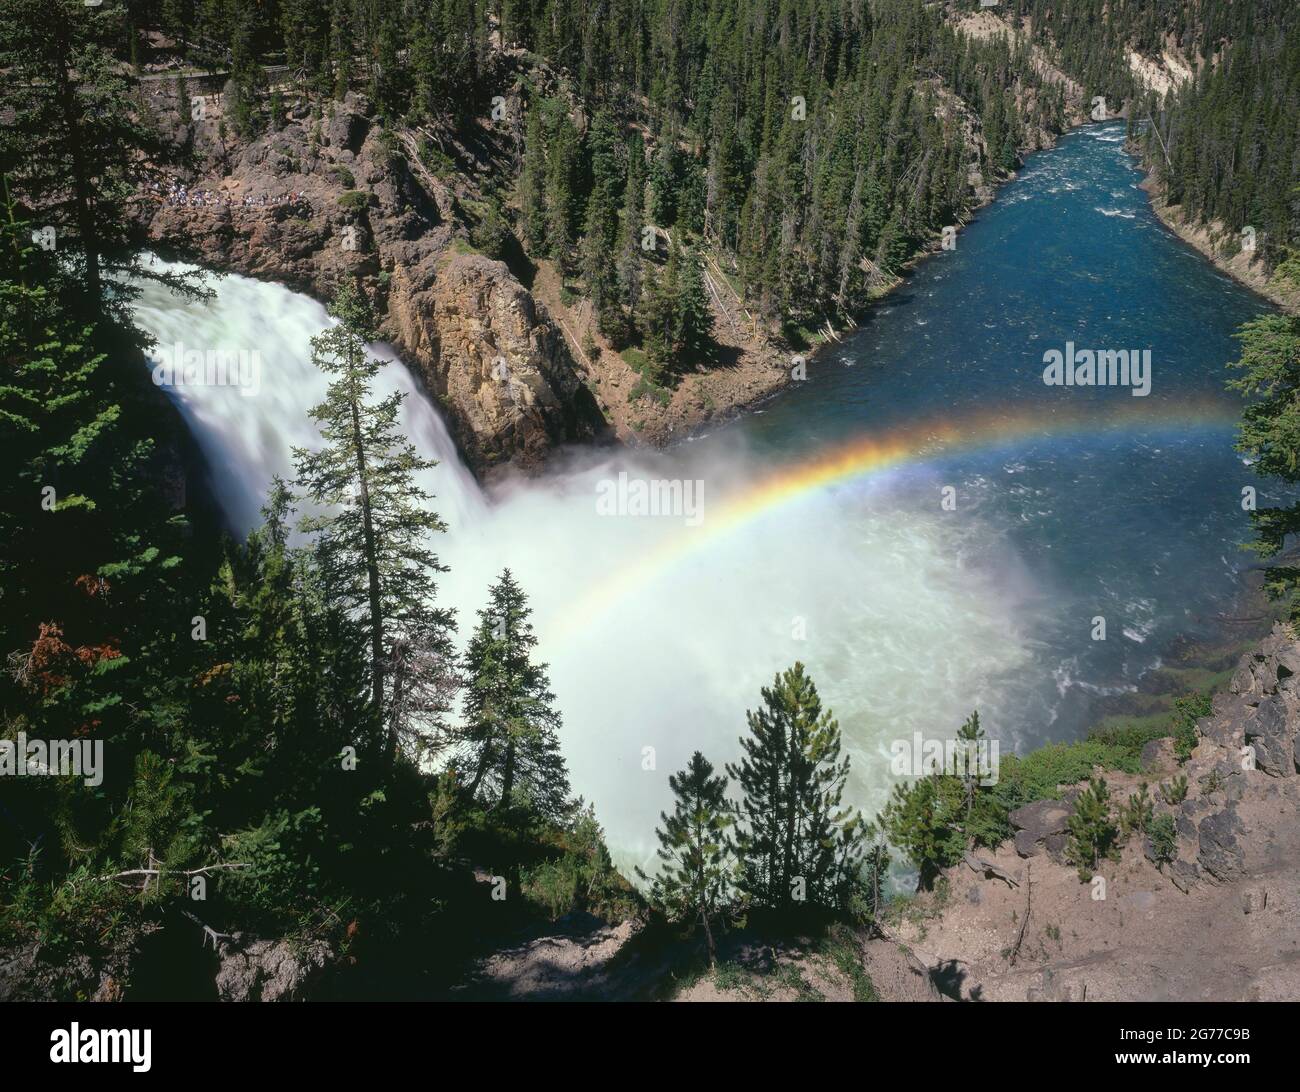 YELLOWSTONE NATIONAL PARK  WY/AUG    A   RAINBOW ARCS OVER THE YELLOWSTONE RIVER  BELOW UPPER YELLOWSTONE FALLS Stock Photo